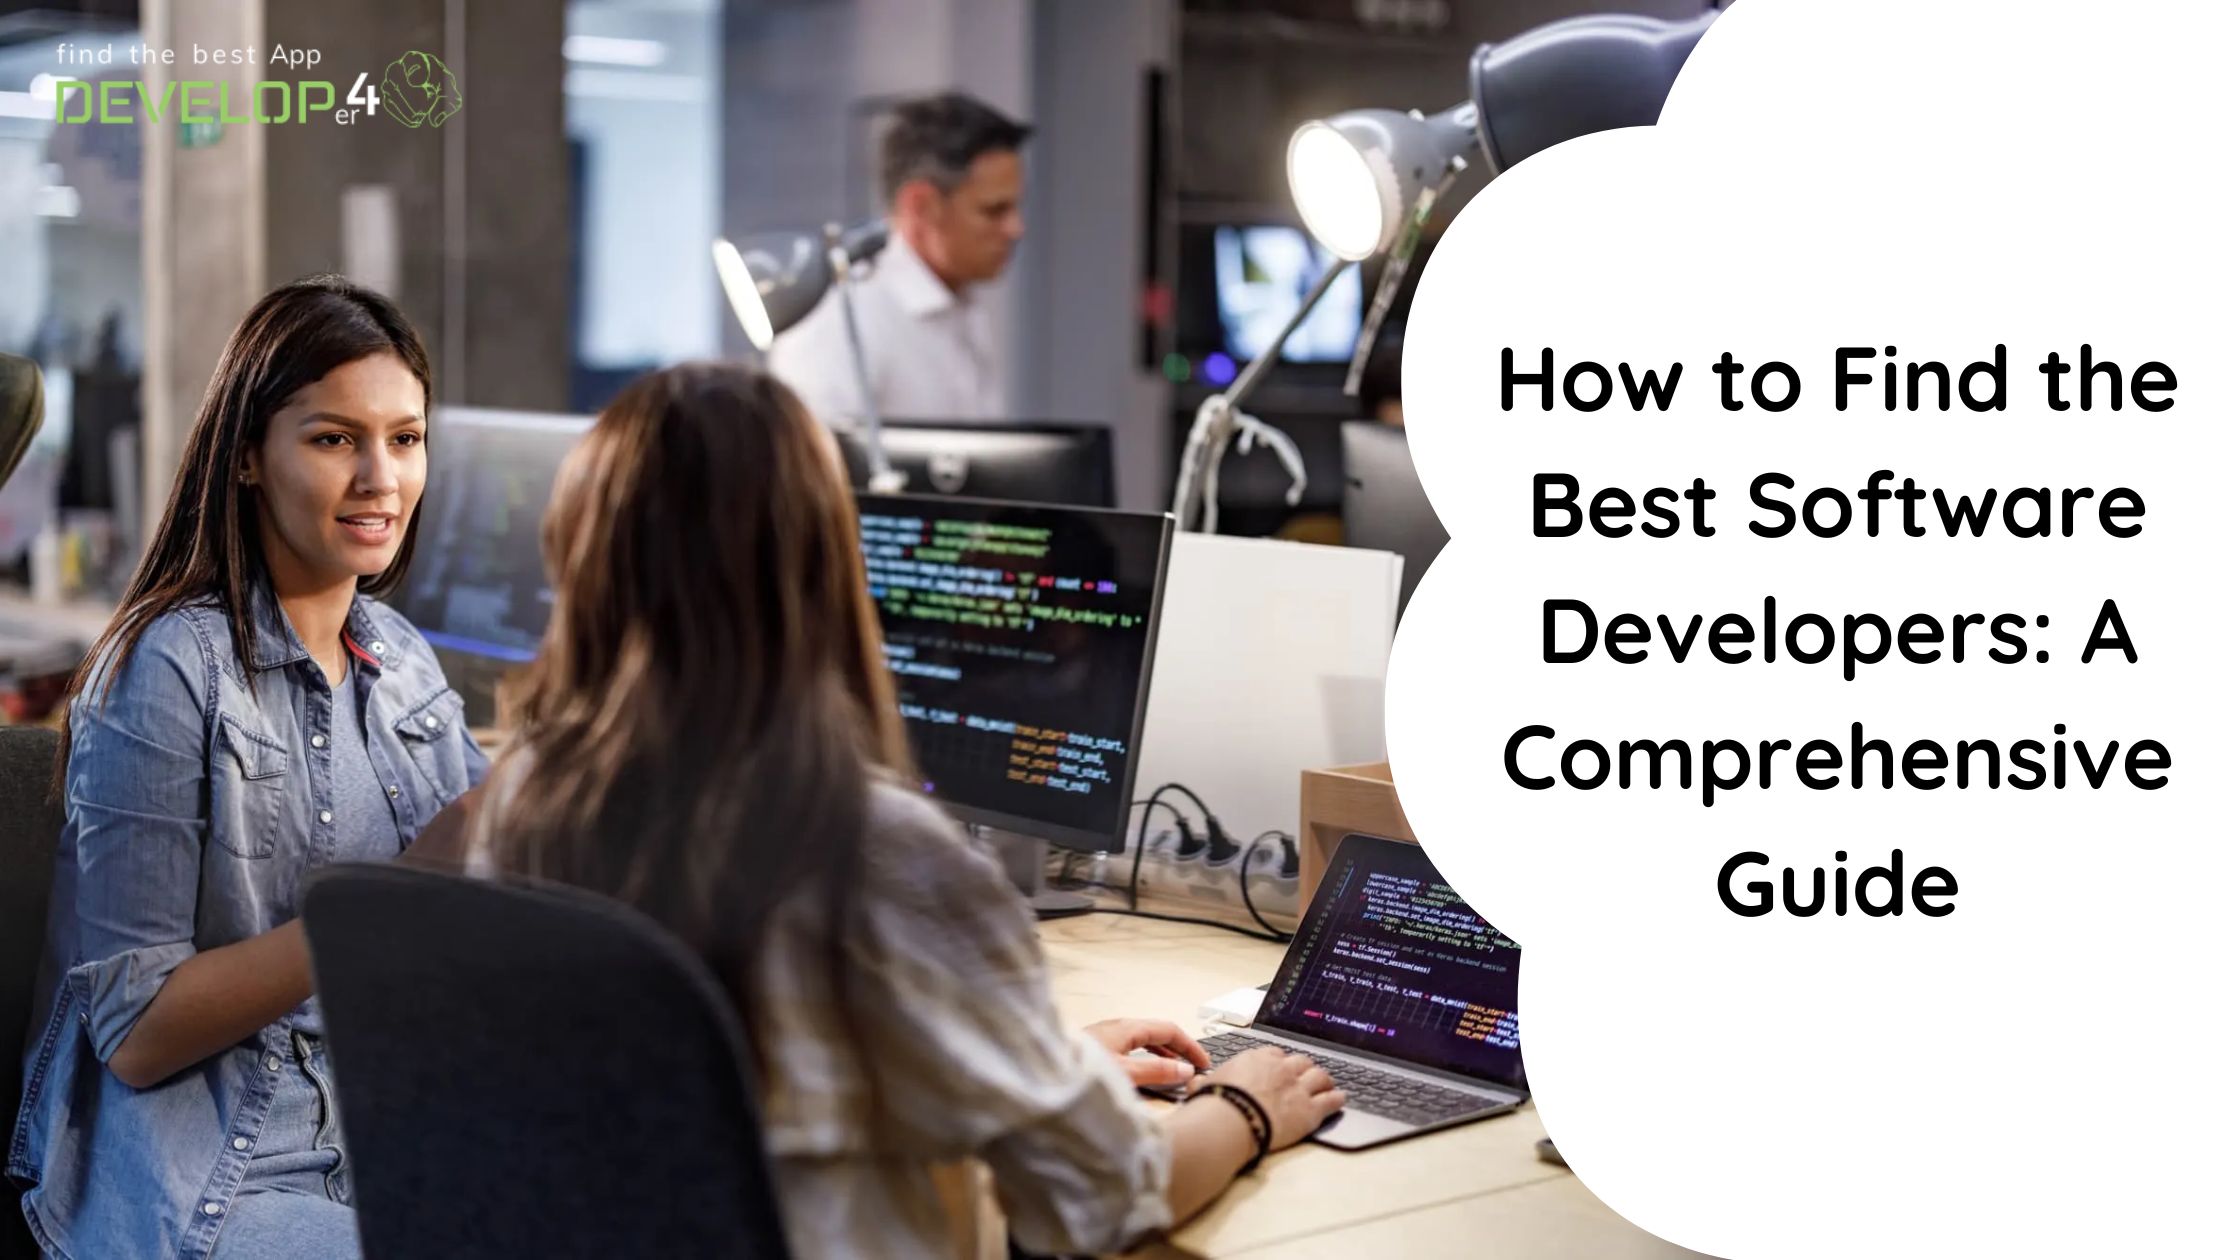 How to Find the Best Software Developers: A Comprehensive Guide